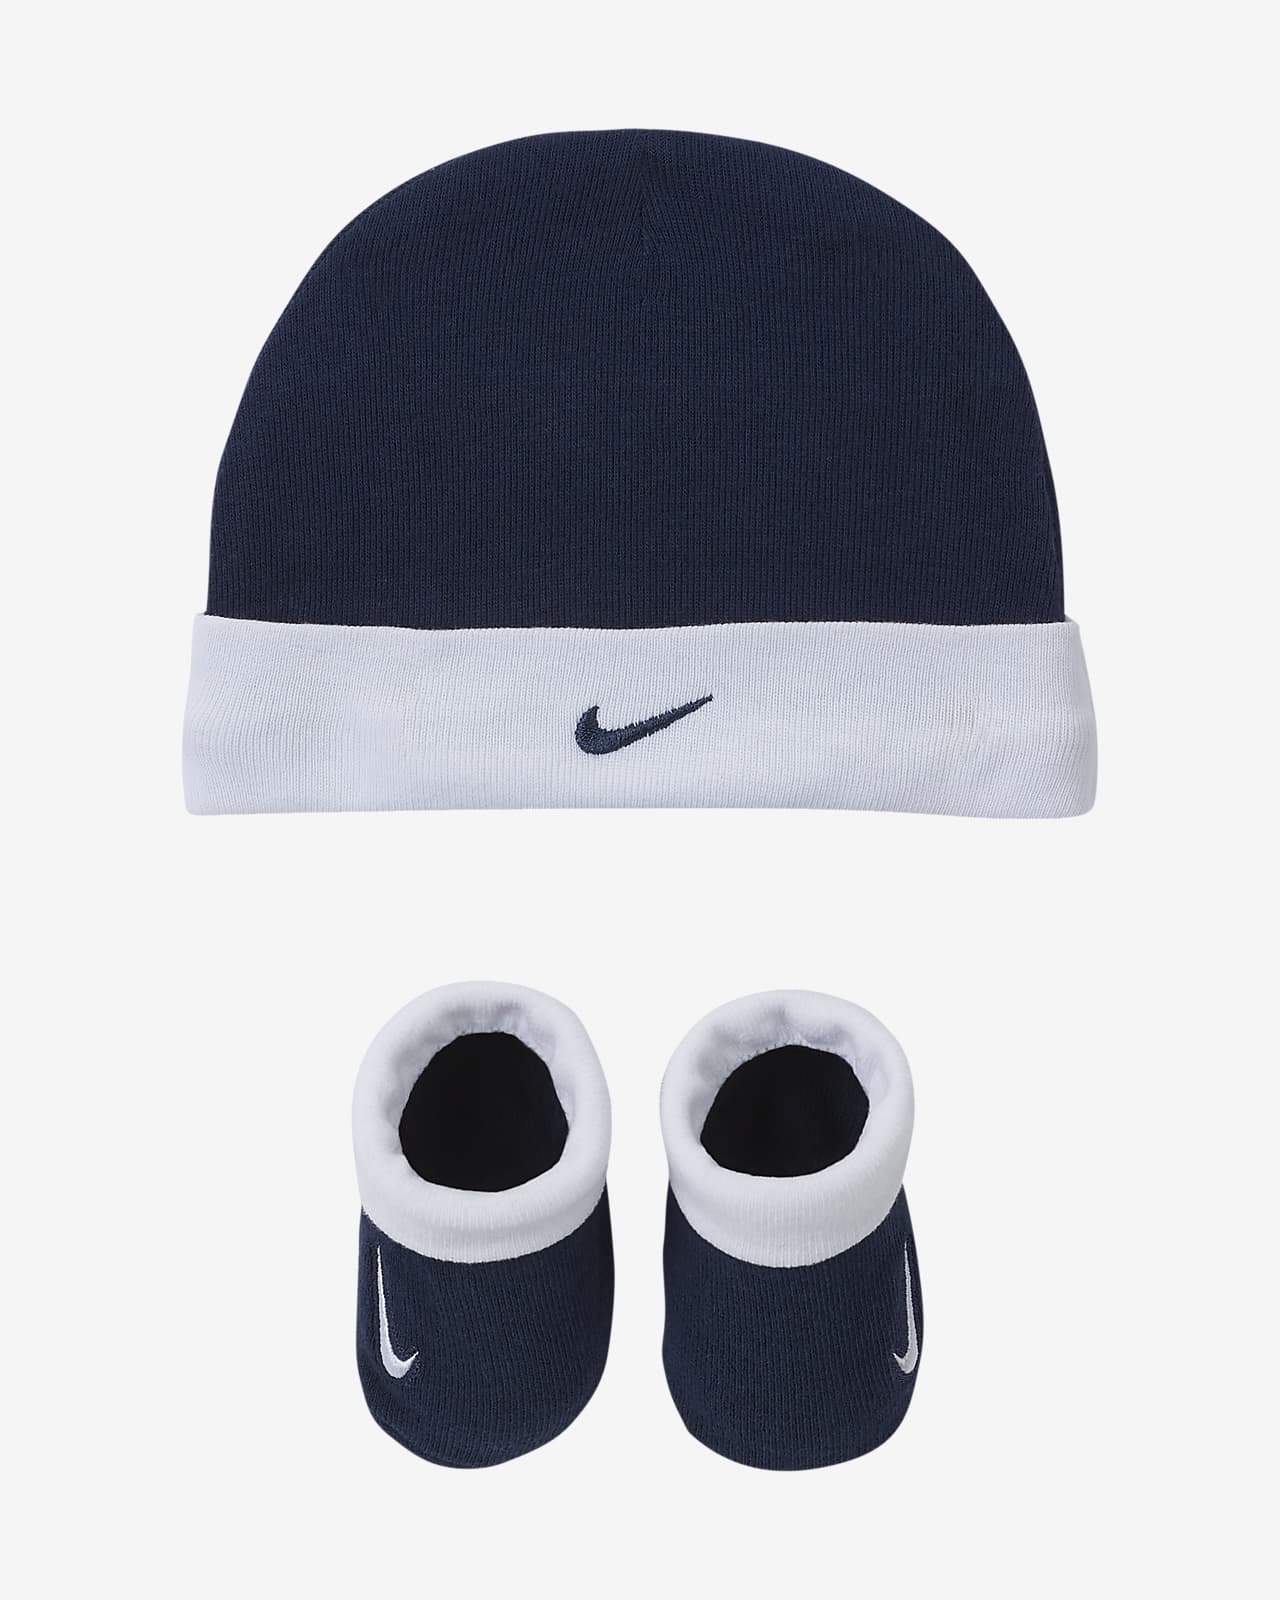 nike hat and booties